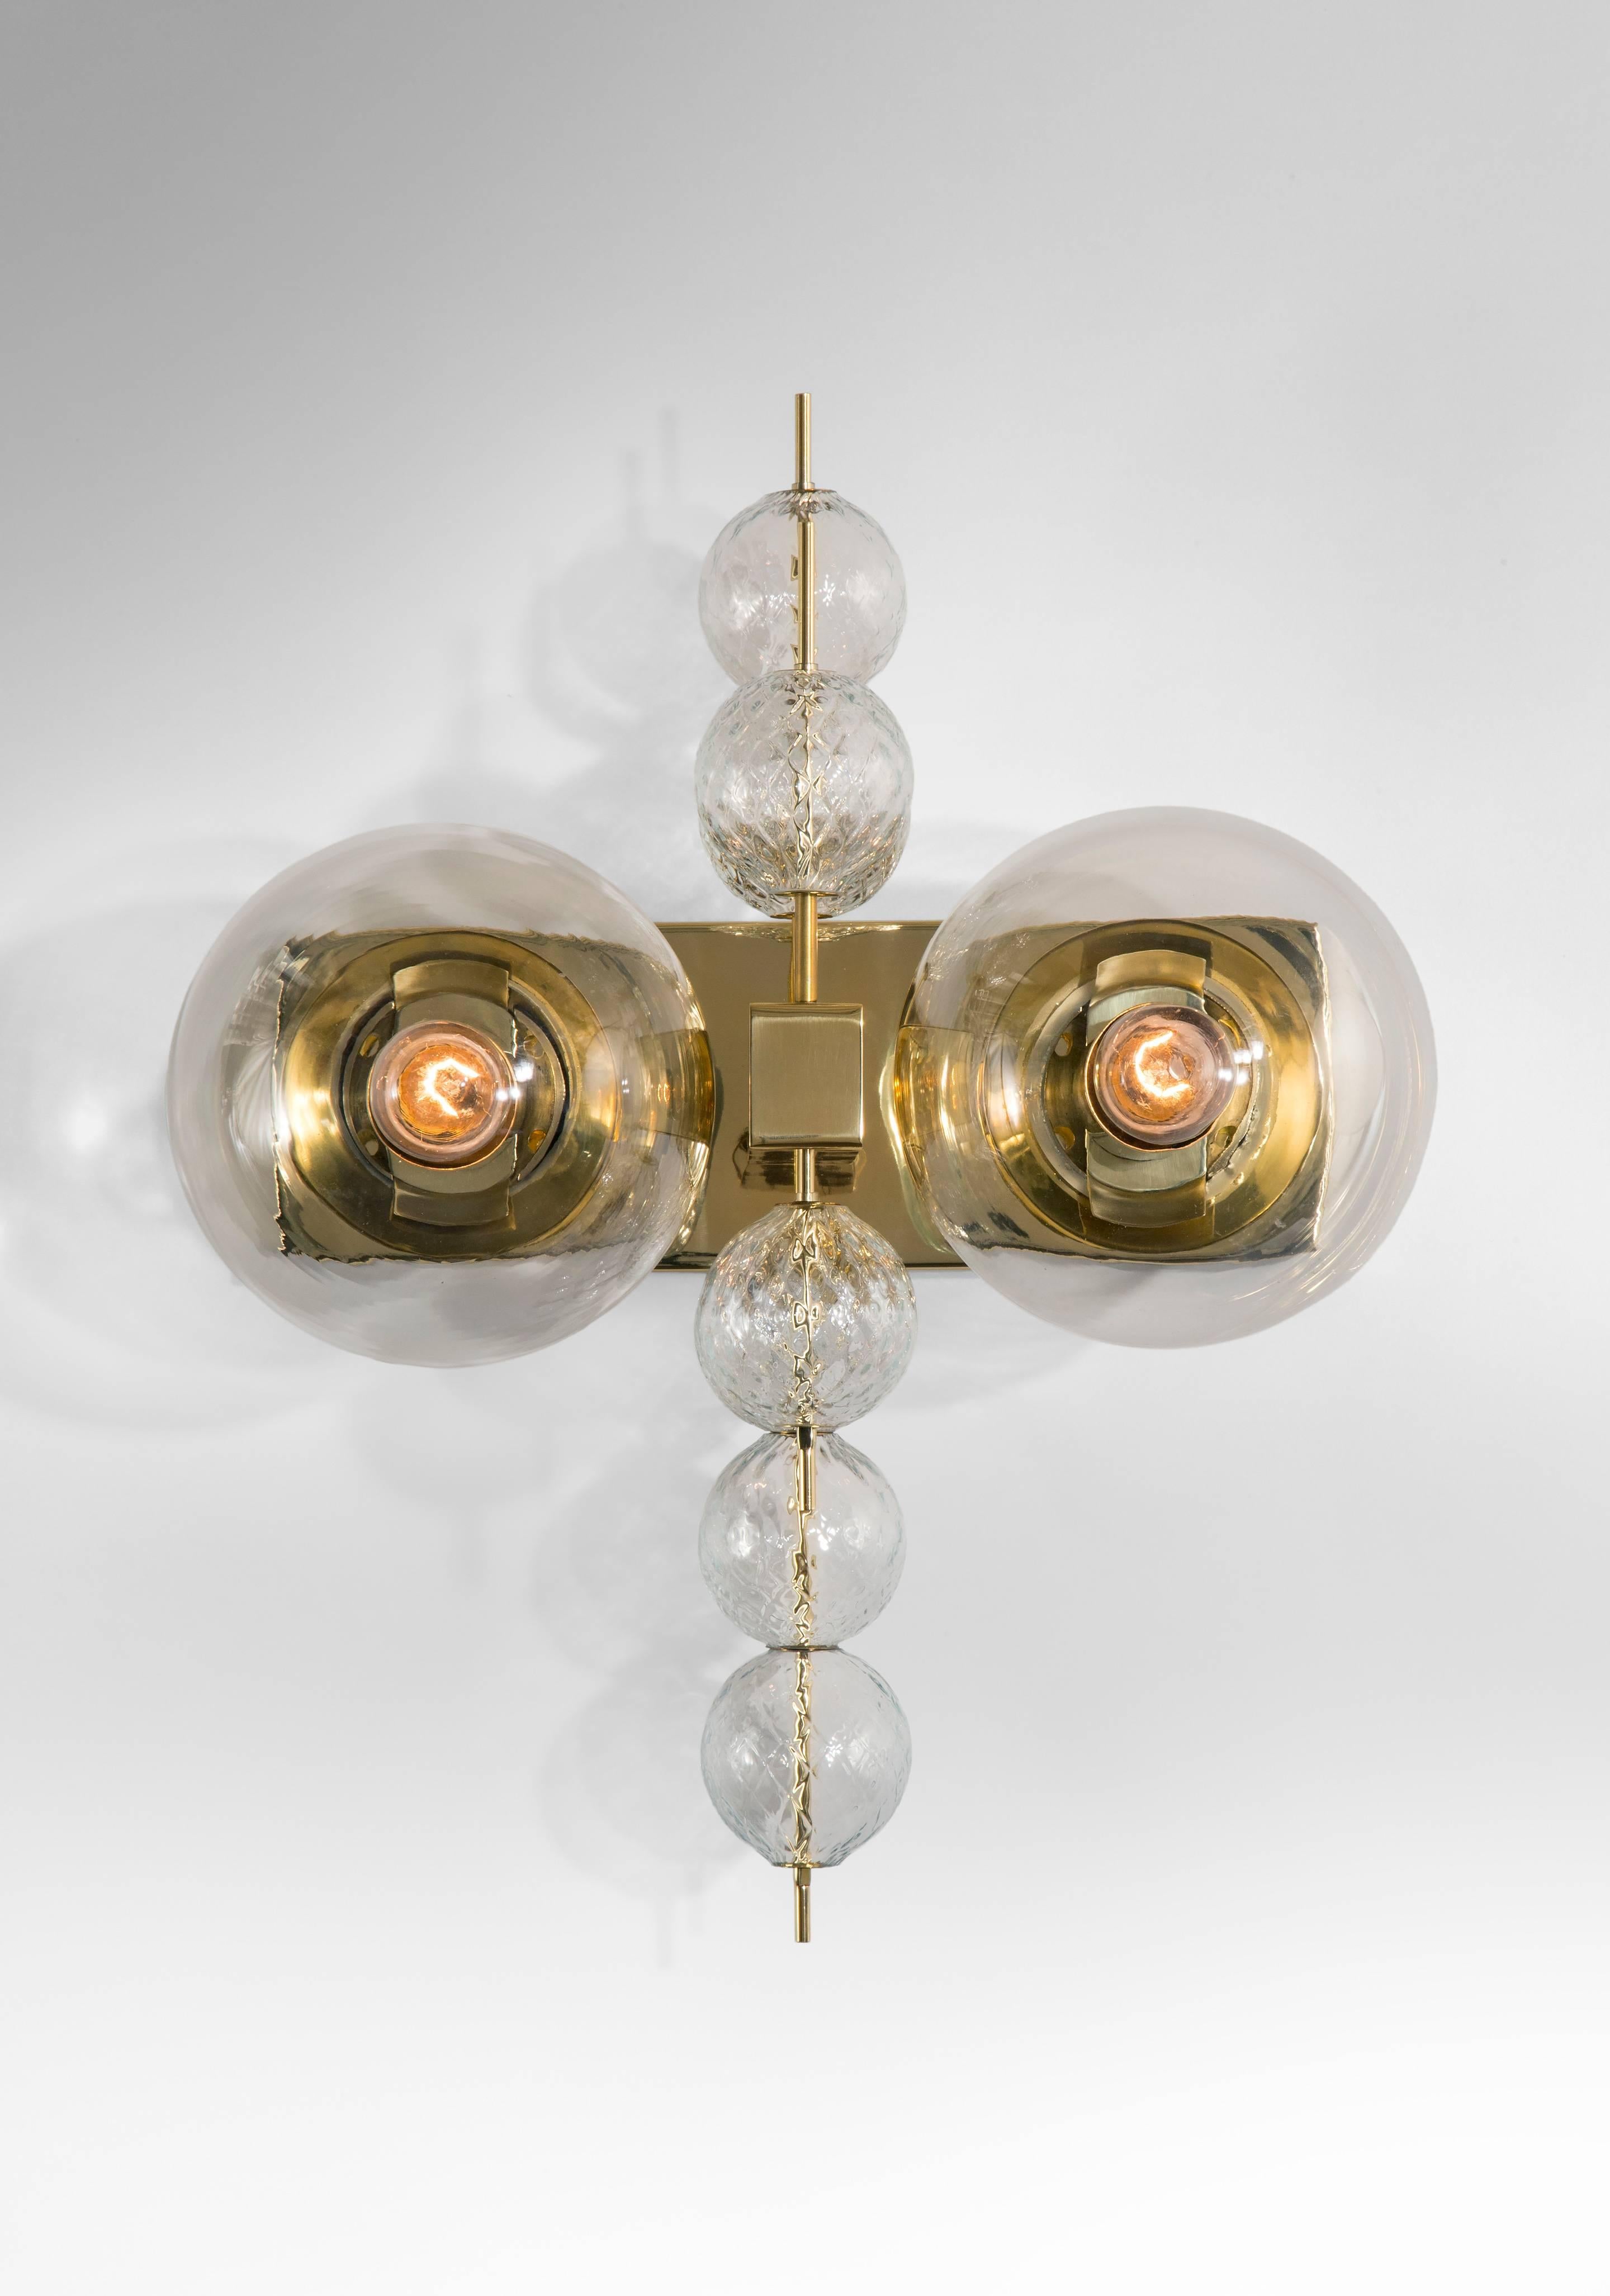 A spirited and chic design. Each rectangular backplate, issuing two illuminated glass globes centering  two rods supporting floating glass spheres.
 
In great overall condition, ready to add to your collection.